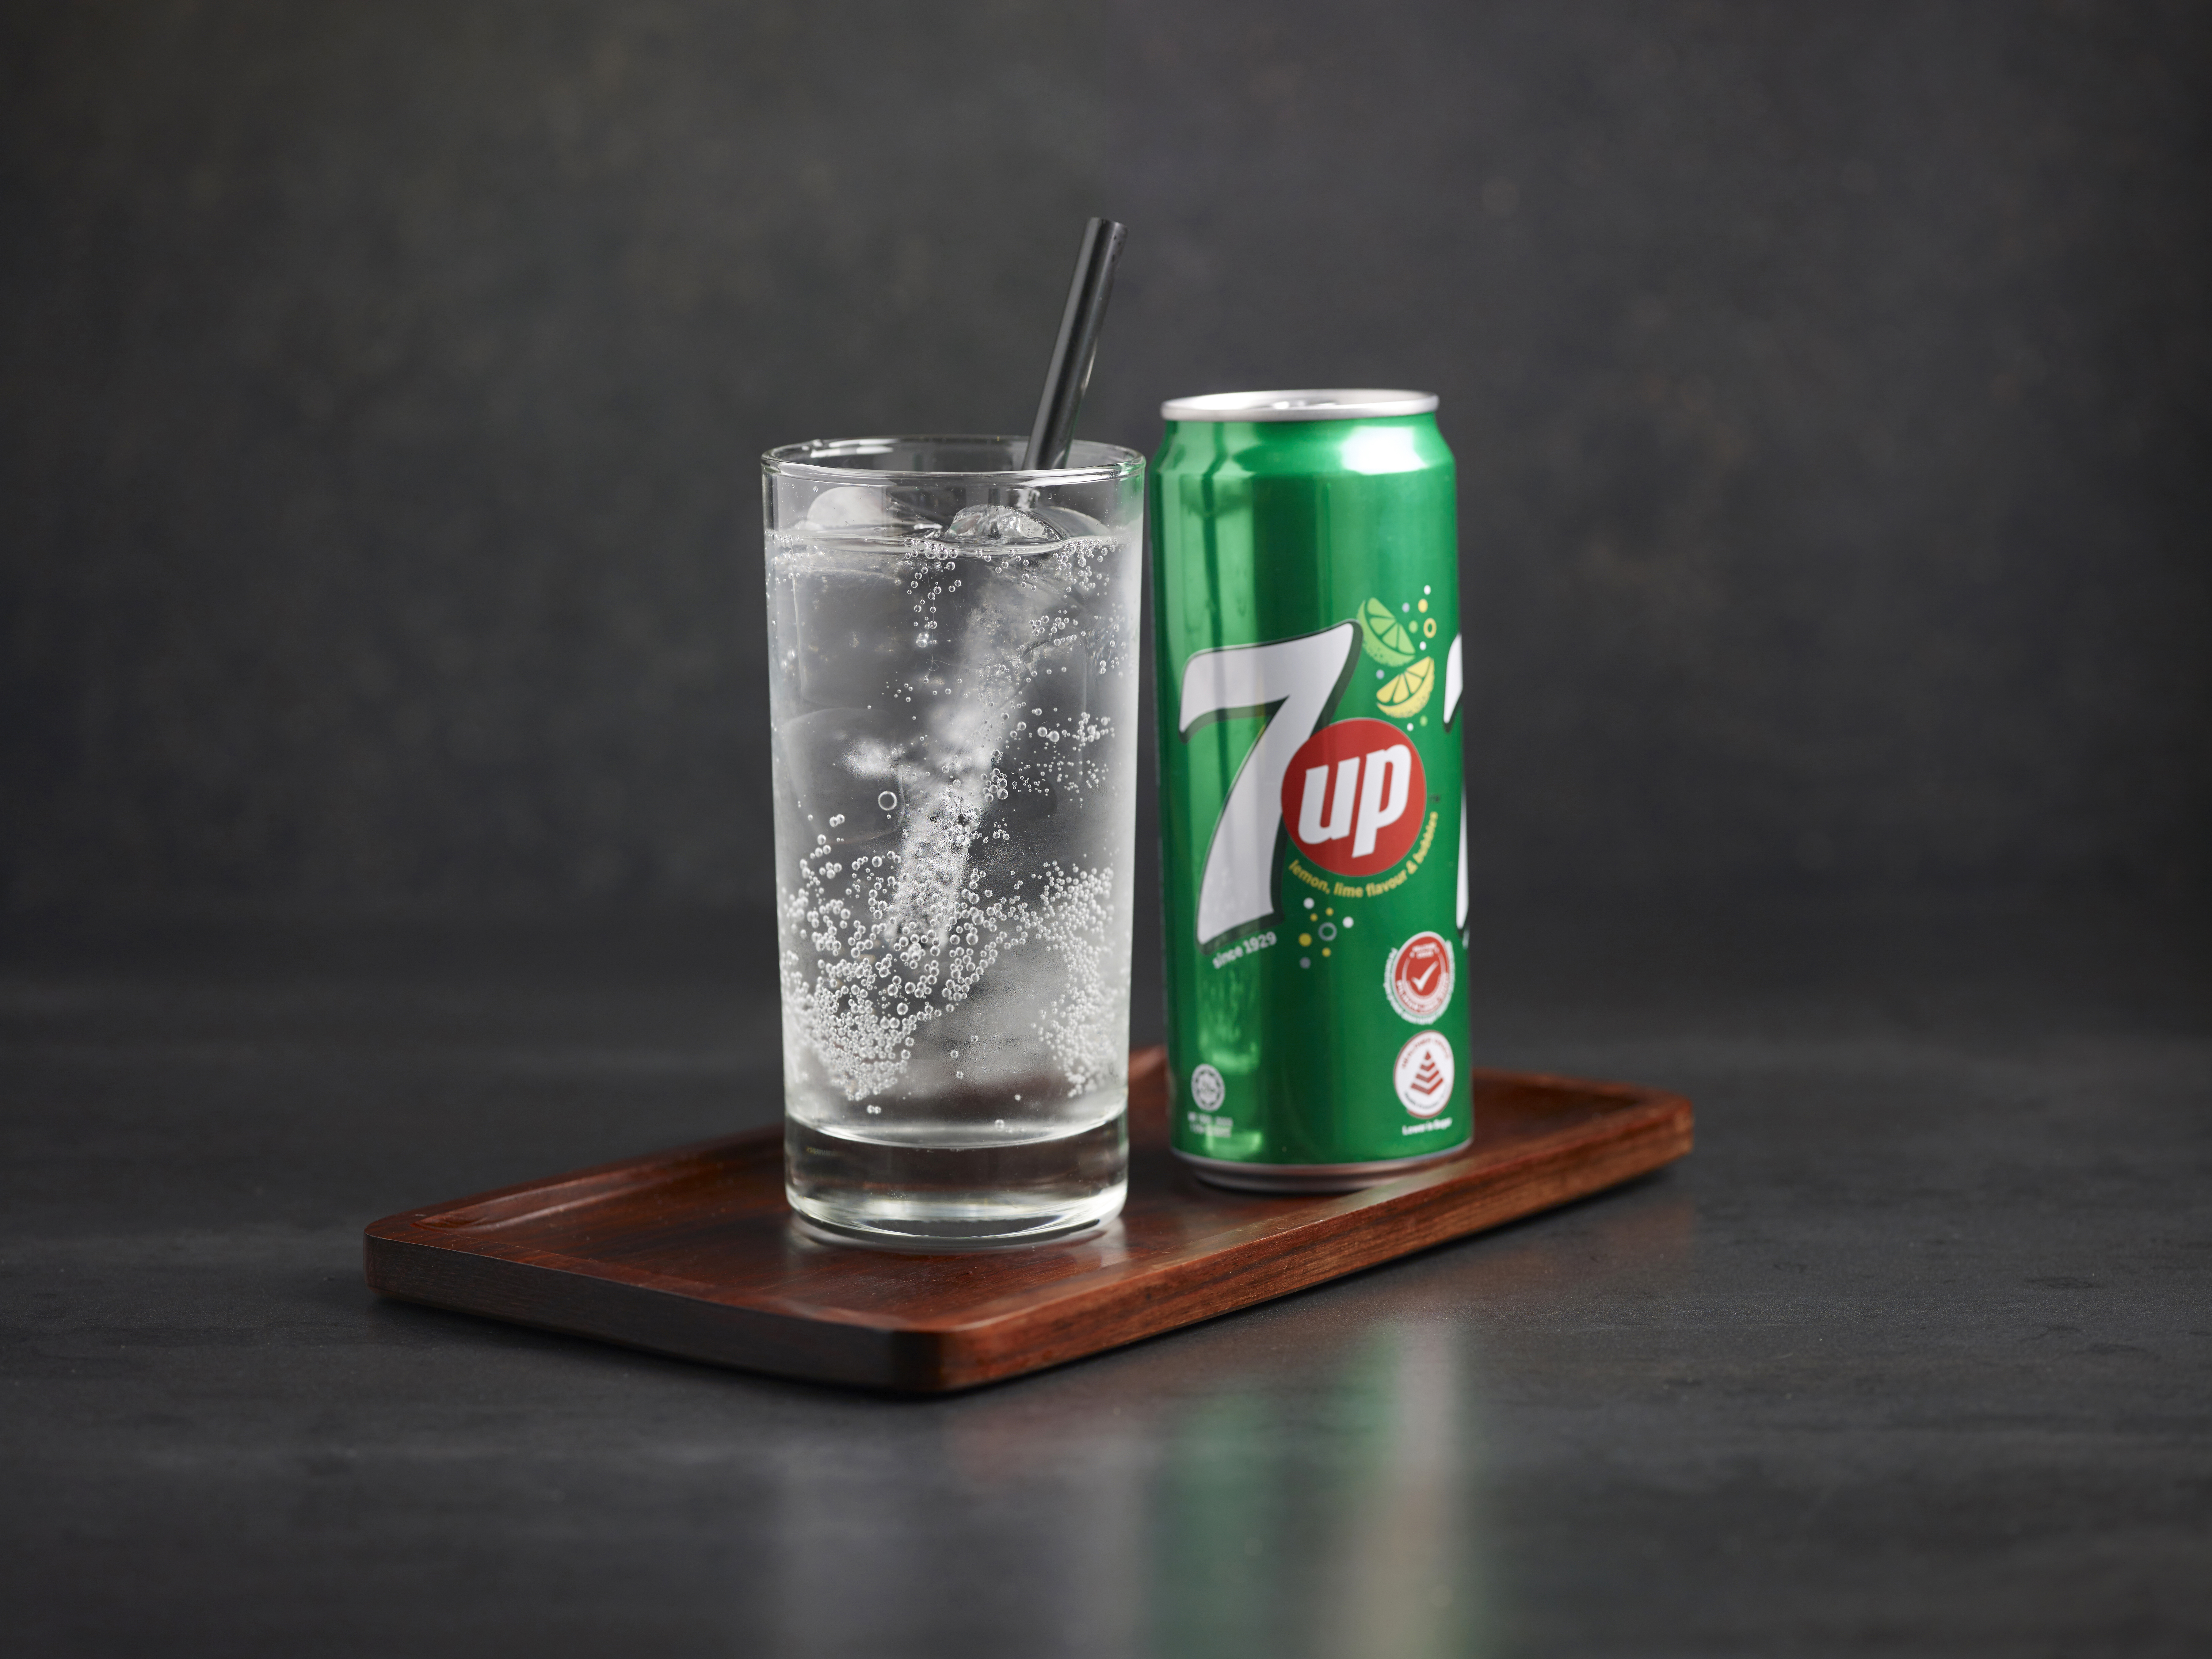 7-up